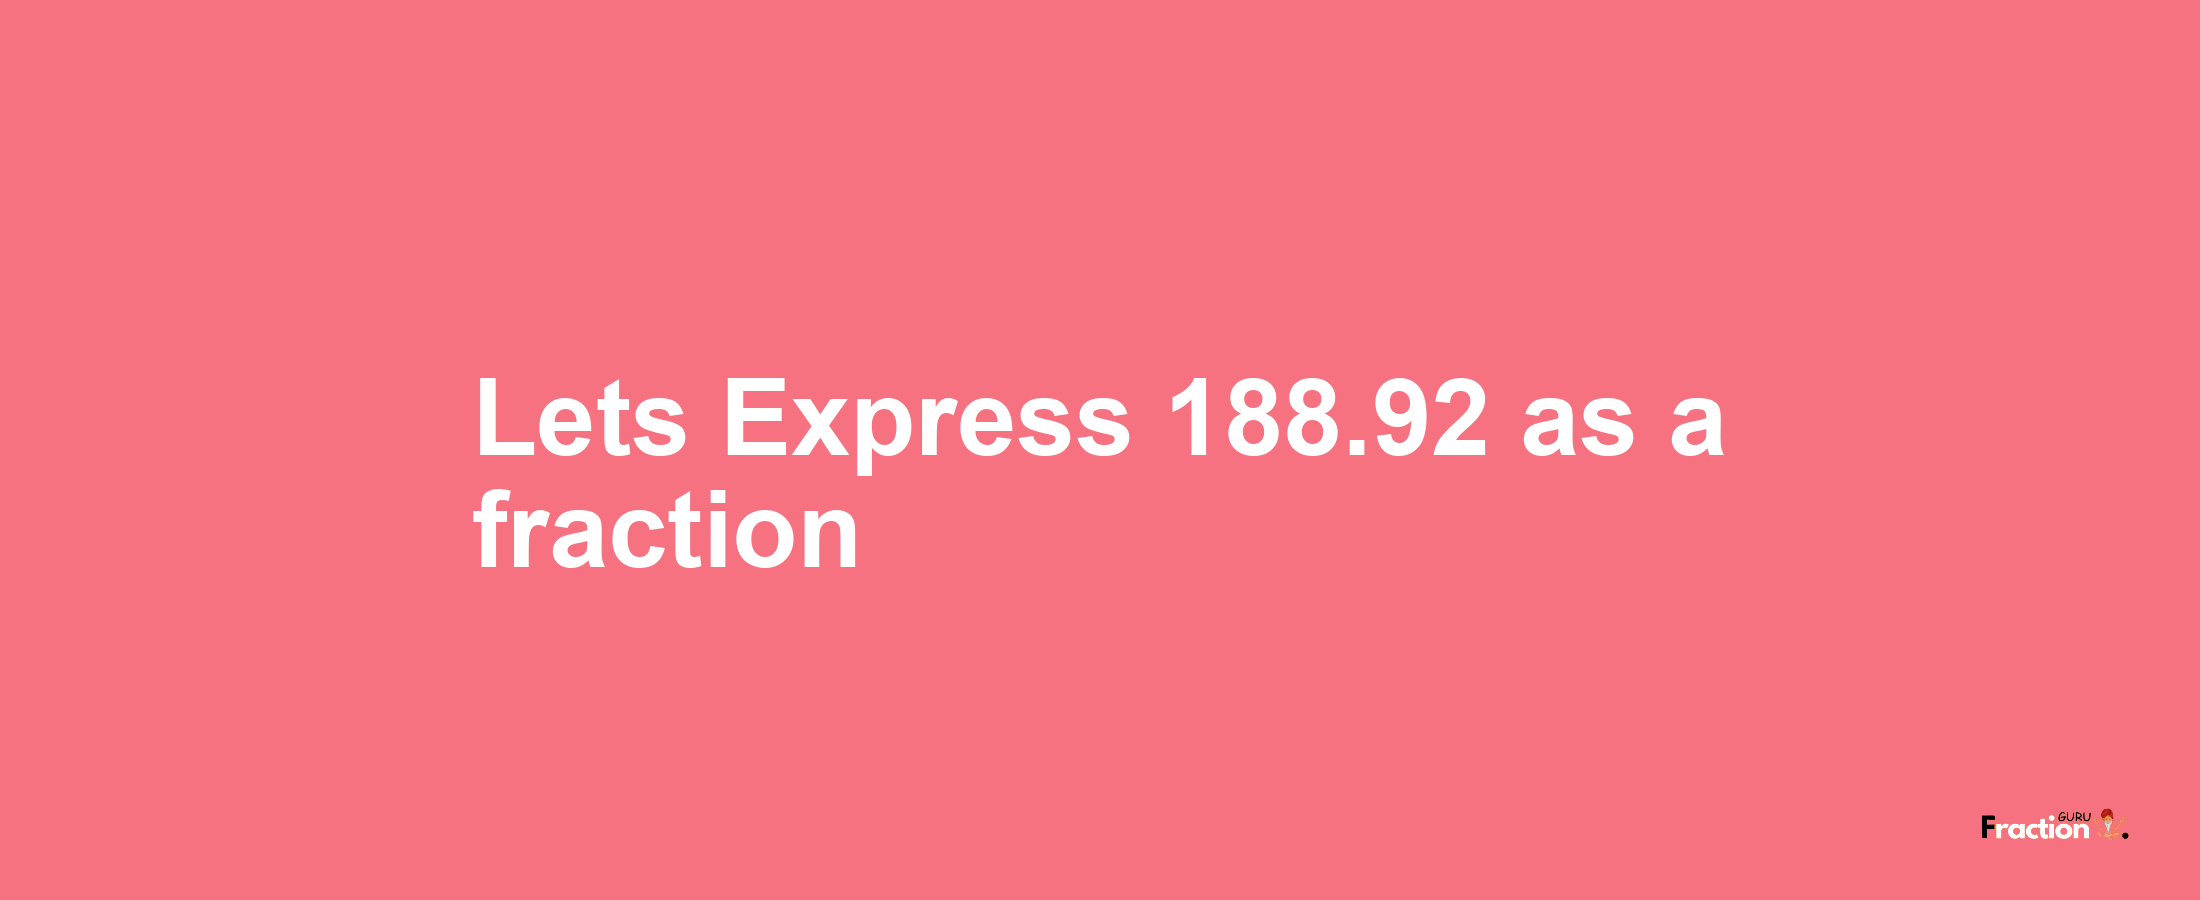 Lets Express 188.92 as afraction